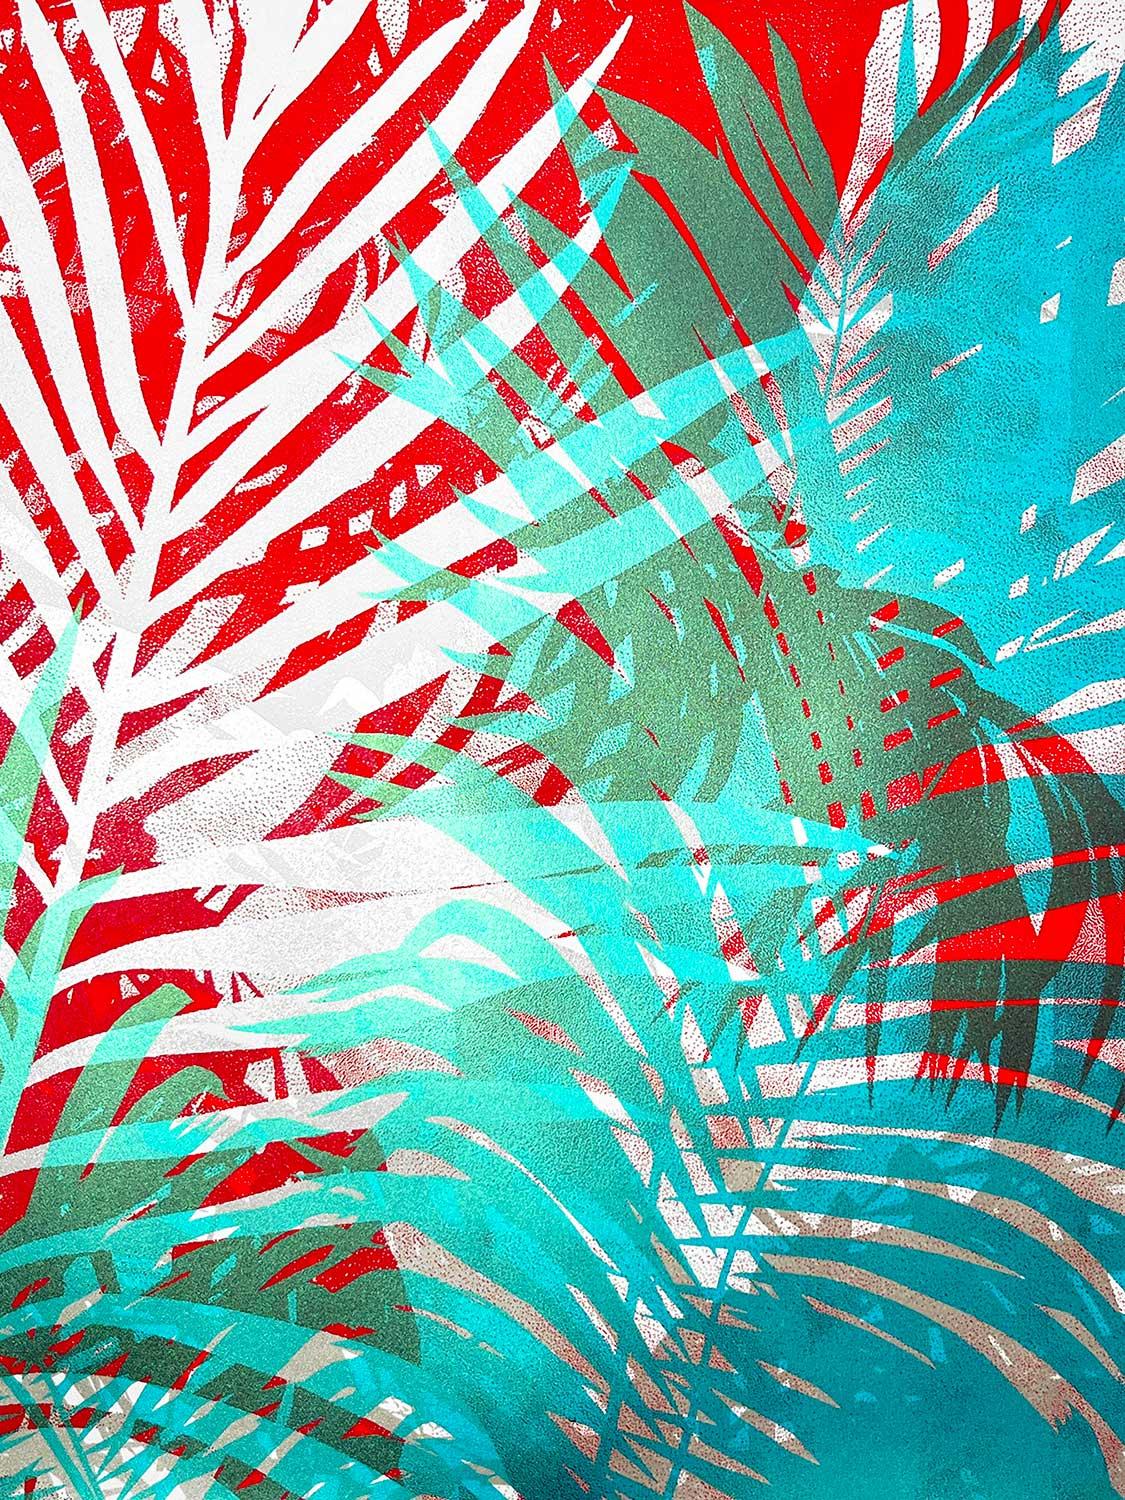 This is a Three colour screen print which includes two metallic inks. The print captures the wild nature of palm tree leaves. Limited edition of 40. It's 40 x 40 cm. Artwork printed on GF Smith Naturalis 330gsm.

ADDITIONAL INFORMATION:
Screen